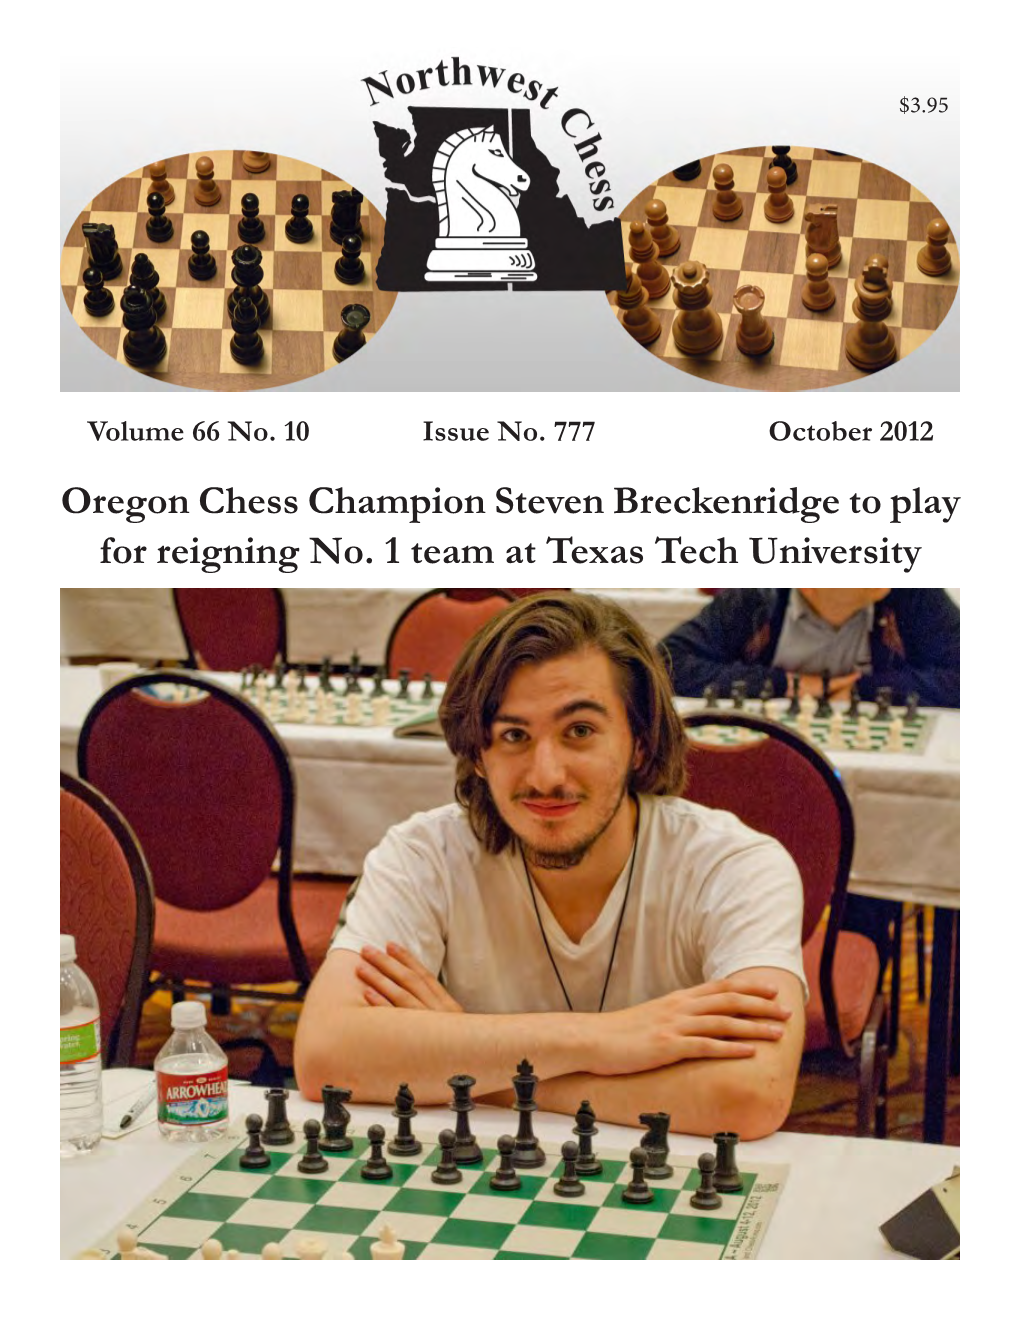 Oregon Chess Champion Steven Breckenridge to Play for Reigning No